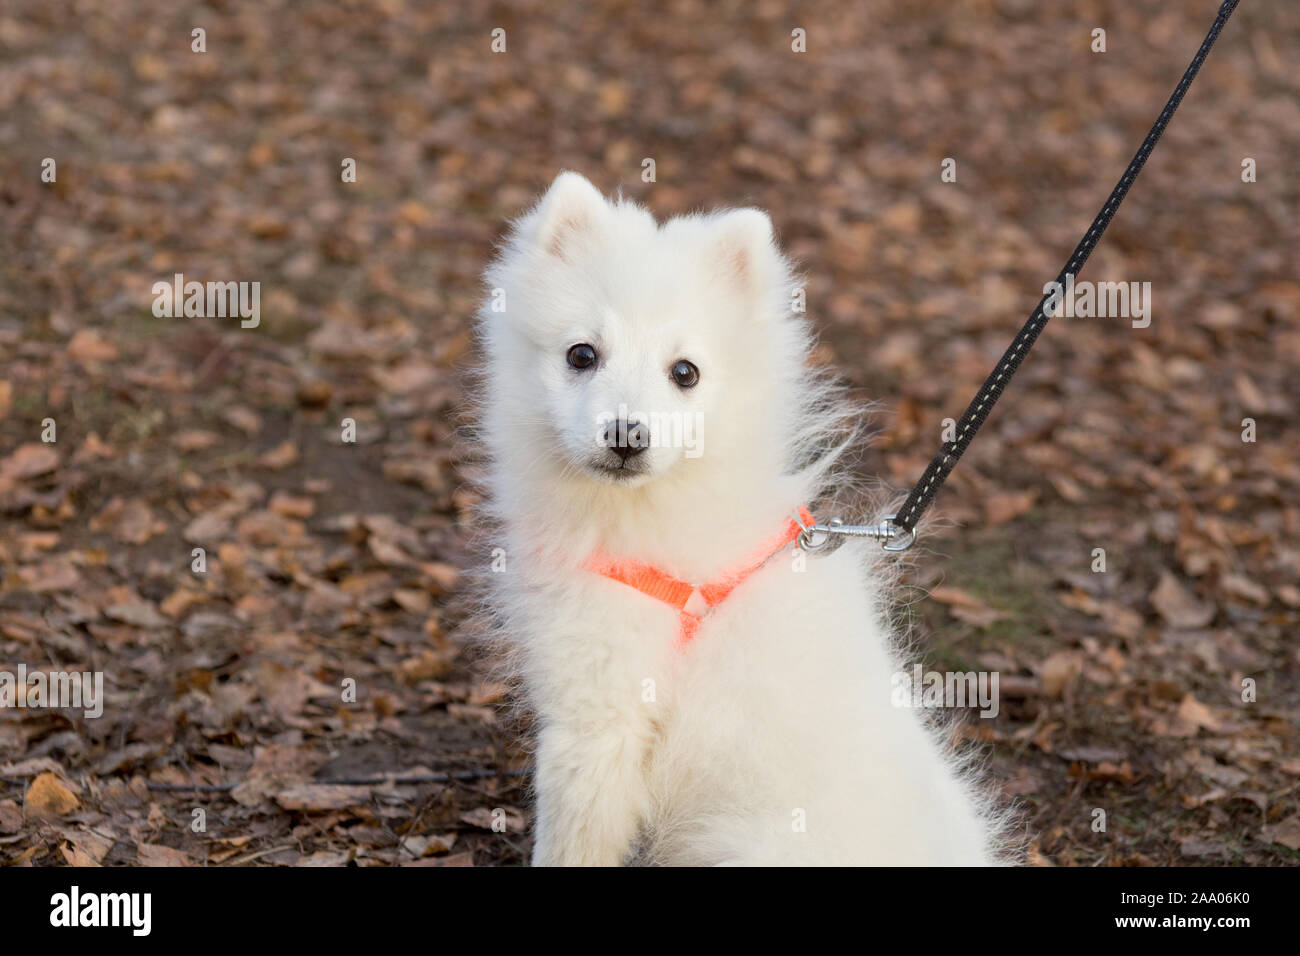 Cute japanese spitz puppy is looking at the camera. Pet animals. Purebred dog. Stock Photo